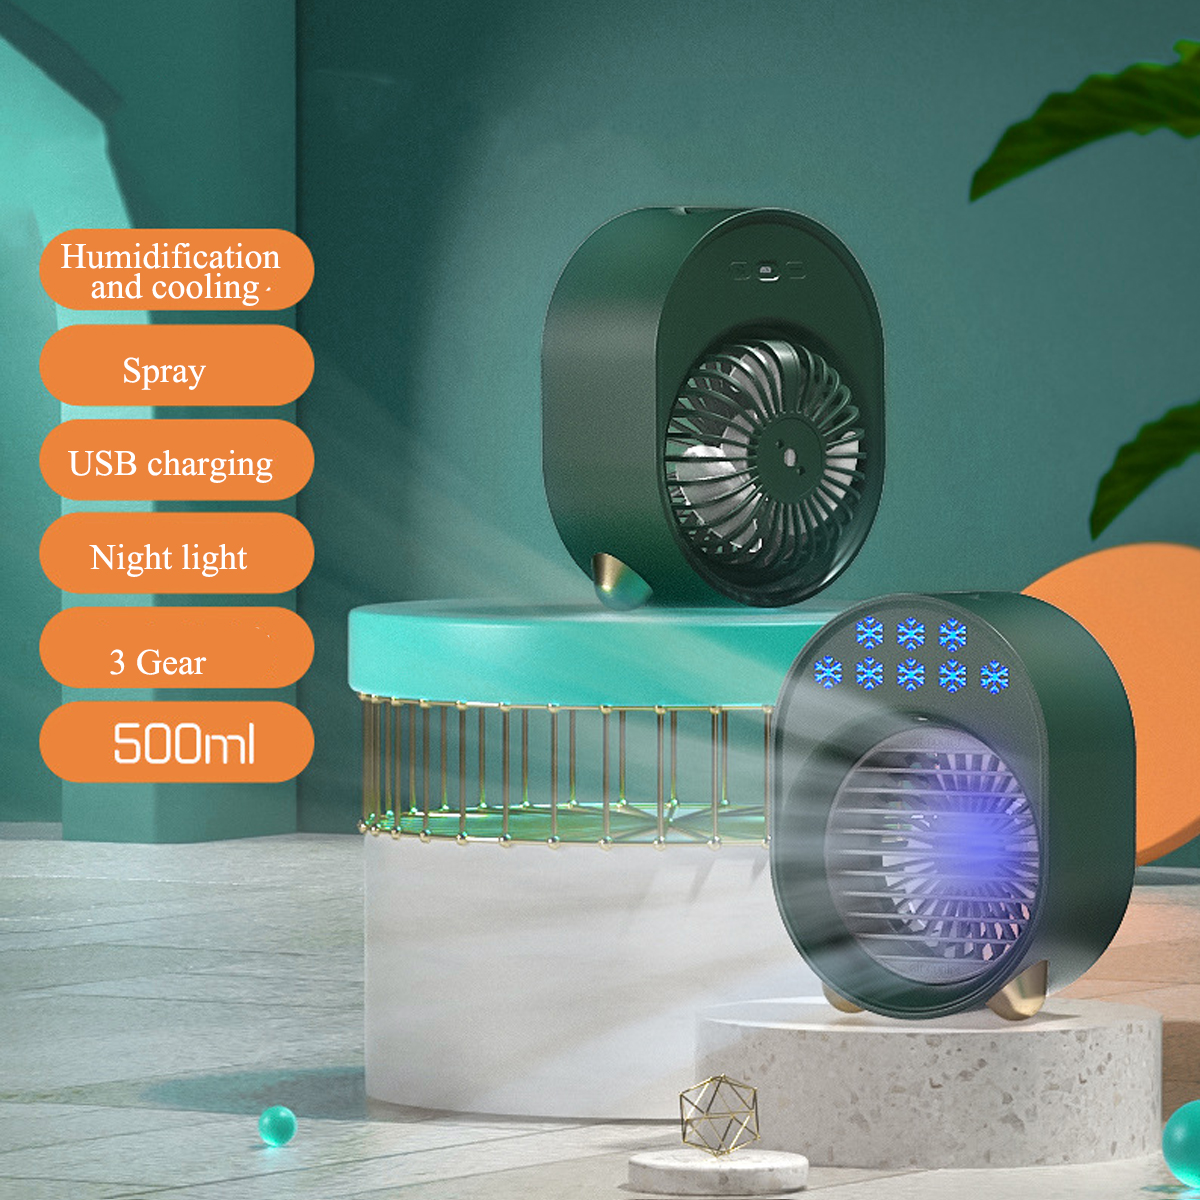 Bakeey-3-Gear-Mini-Water-Cooling-Fan-Spray-Humidification-Portable-Colorful-Night-Light-Air-Cooler-T-1838417-12